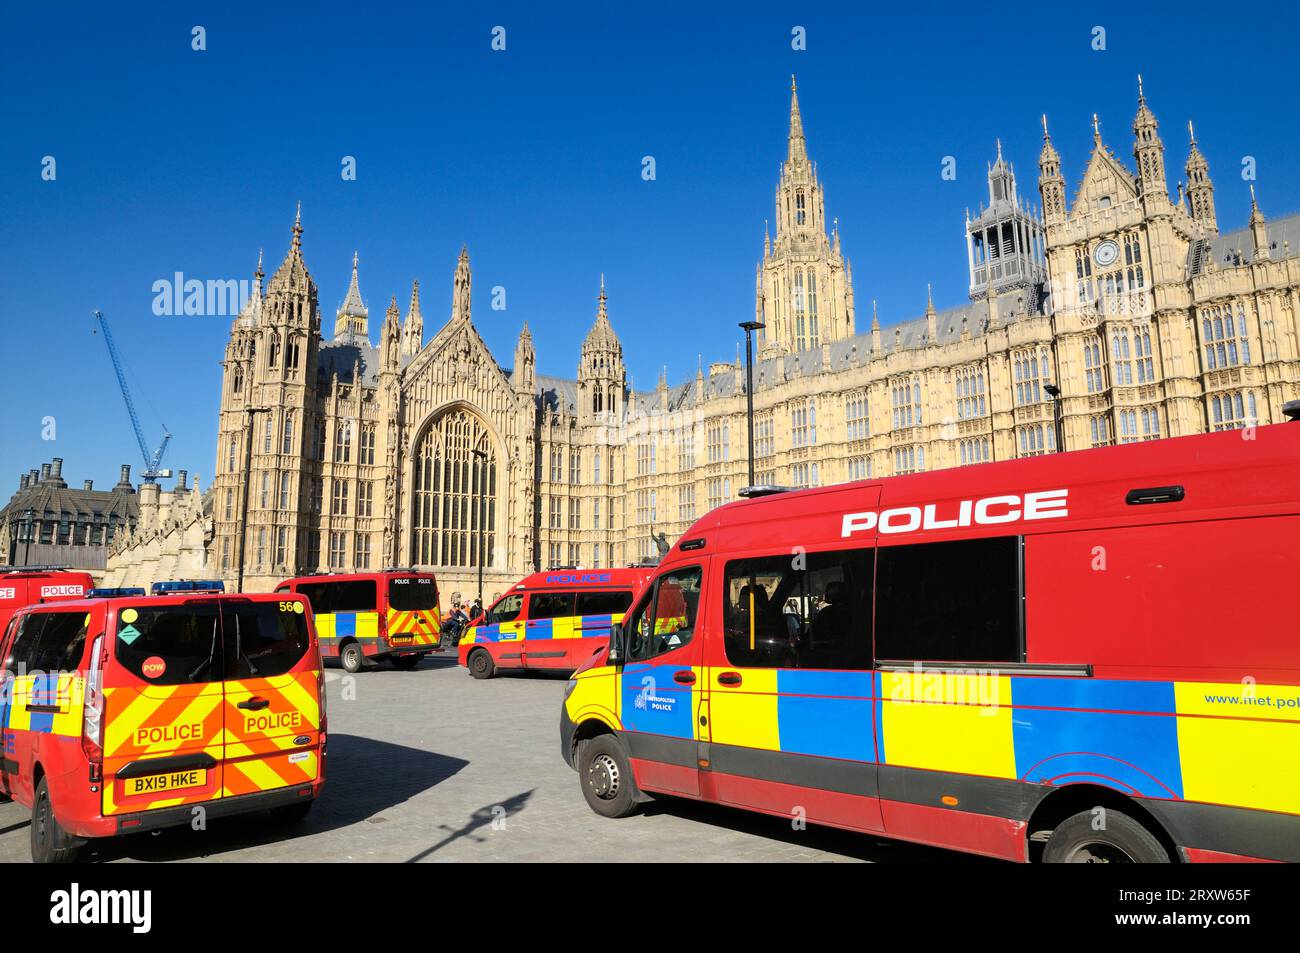 Met Police vans outside Palace of Westminster / Houses of Parliament, London, UK. Red vans are the Parliamentary and Diplomatic Protection Group PADP. Stock Photo